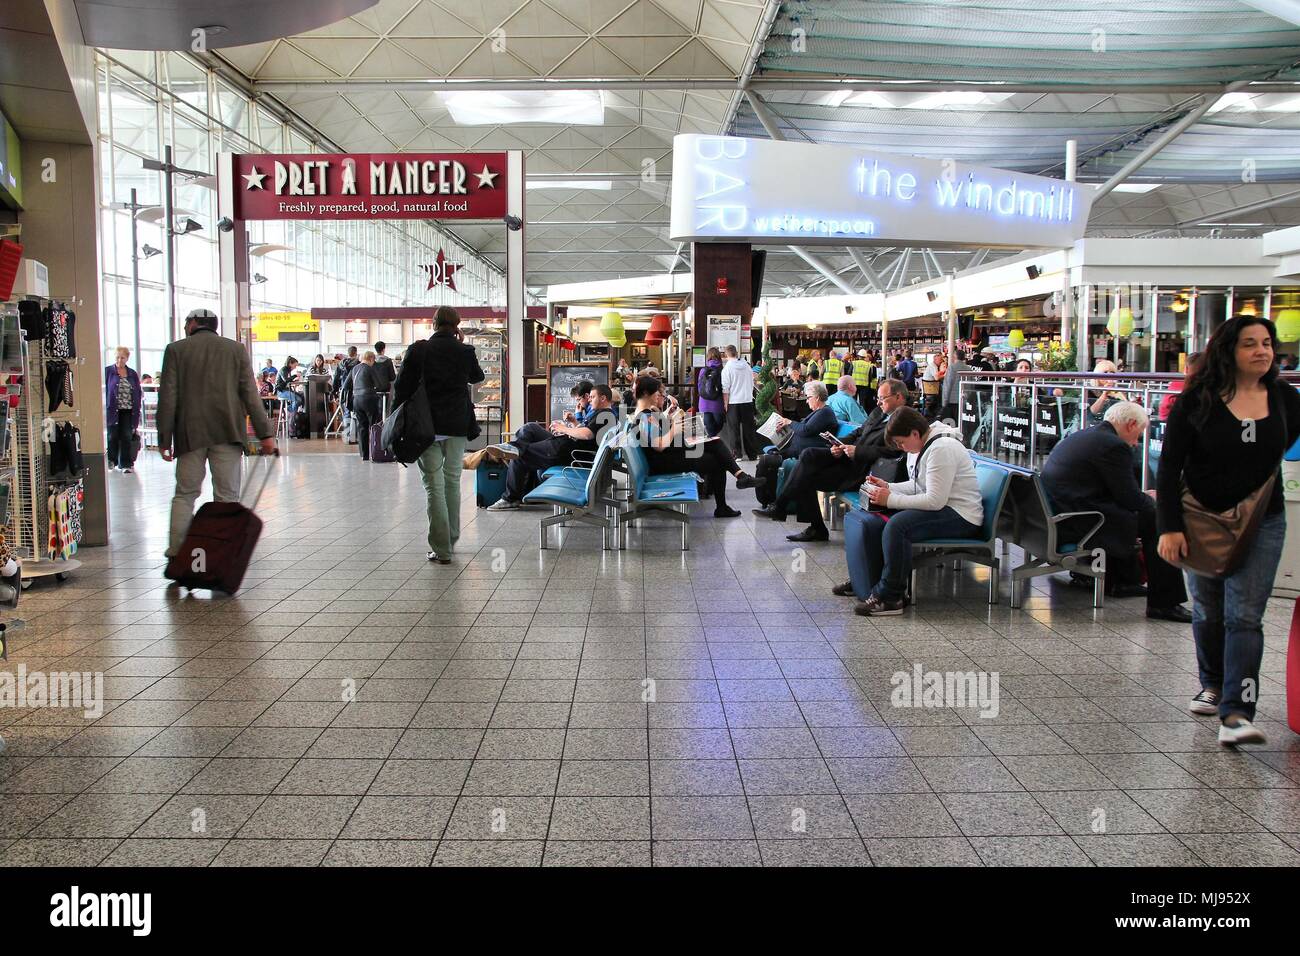 LONDON - MAY 16: Travelers wait at Stansted airport on May 16, 2012 in London. It was the 4th busiest airport in the UK with 17.4 million passengers. Stock Photo